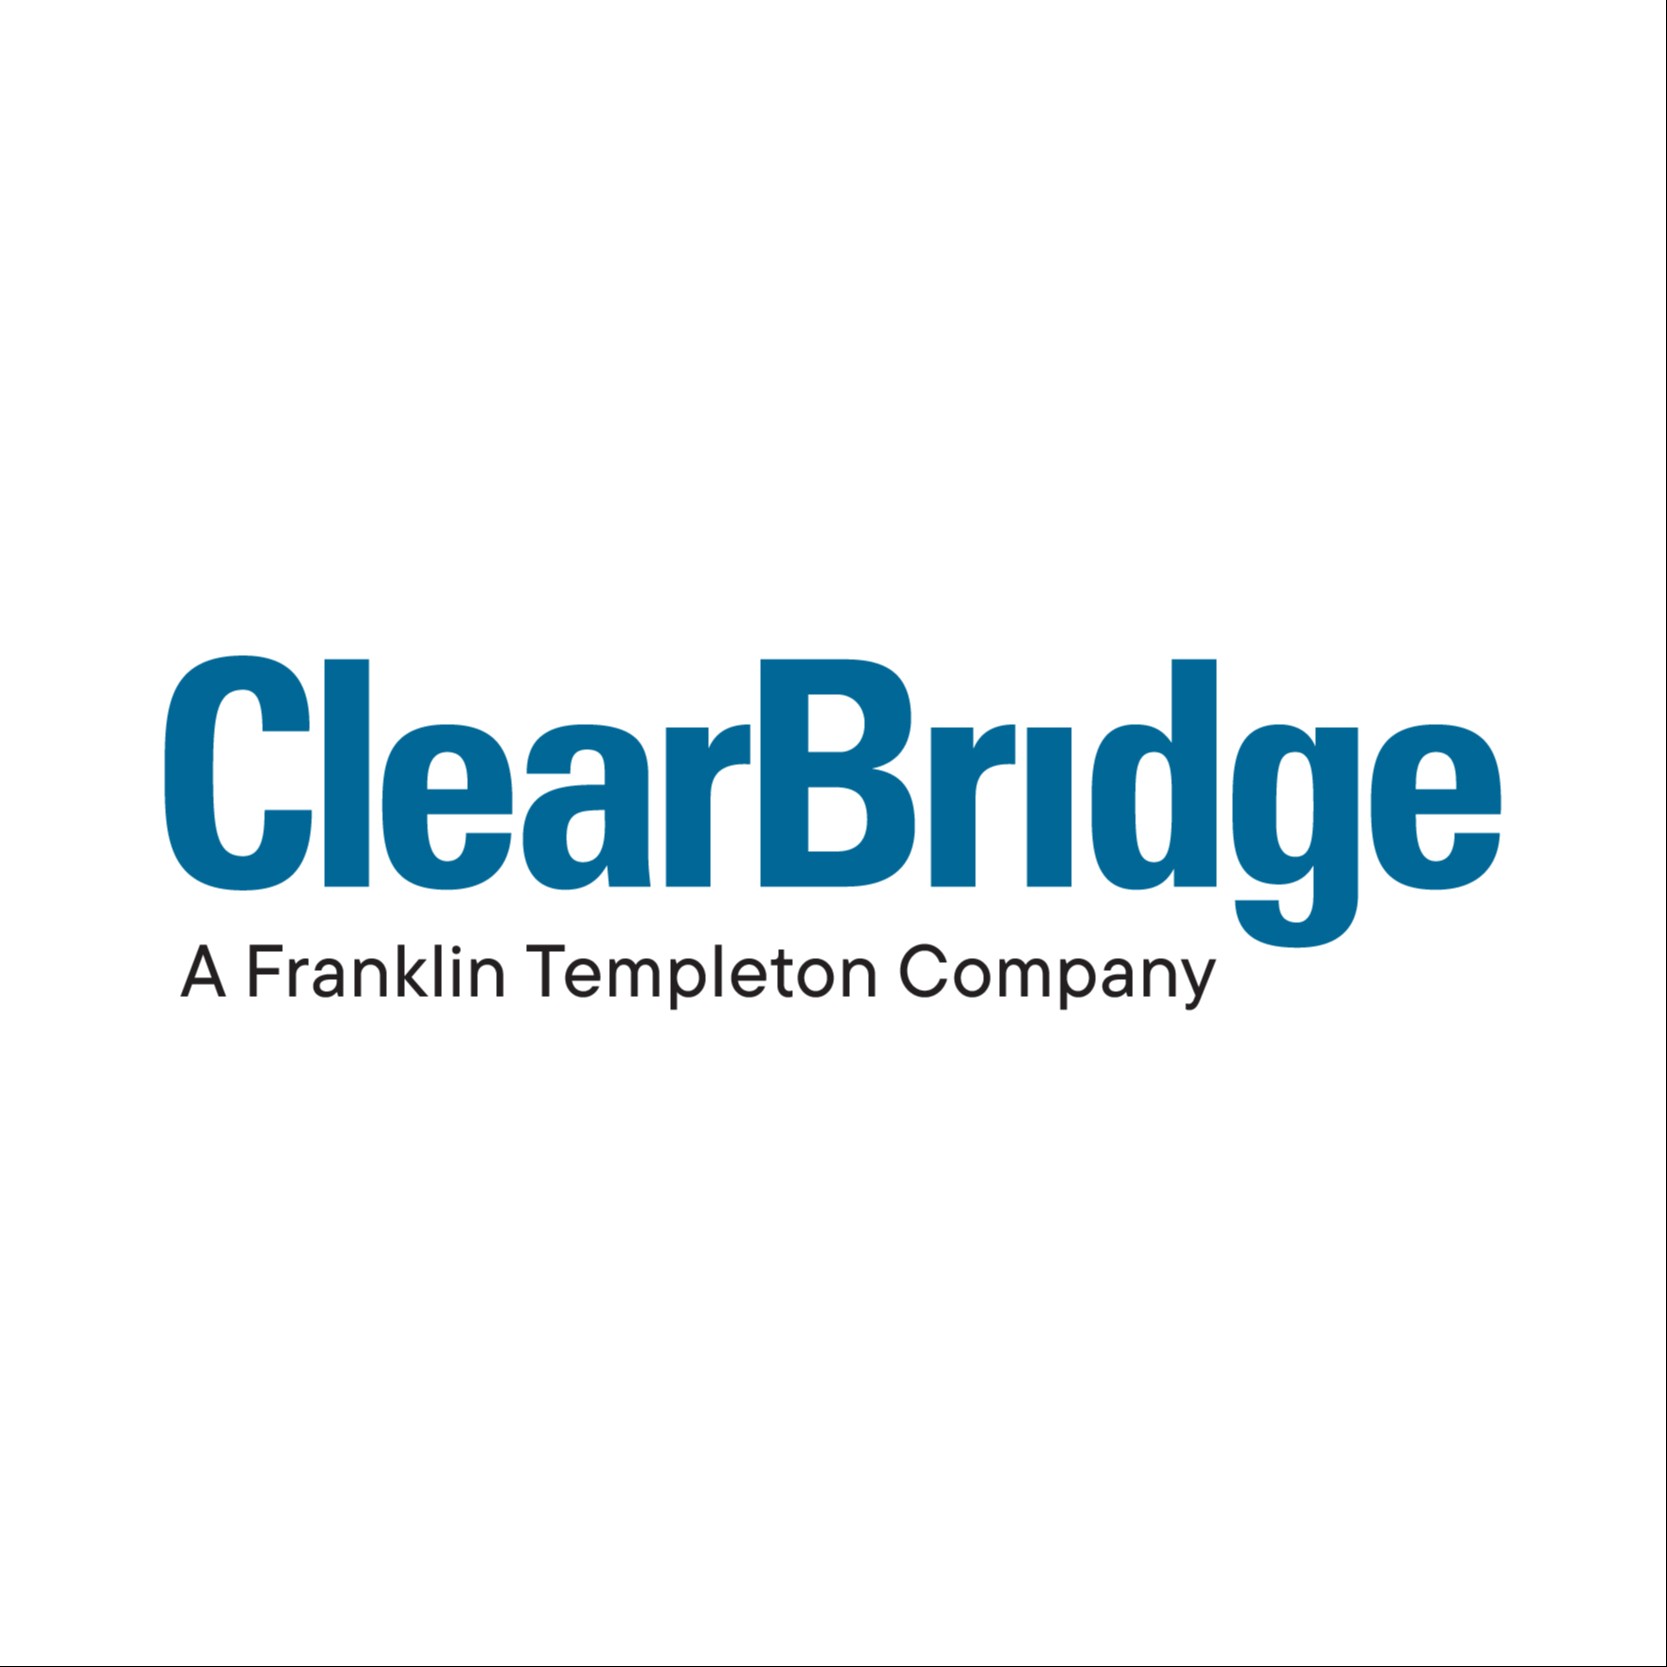 ClearBridge Investments